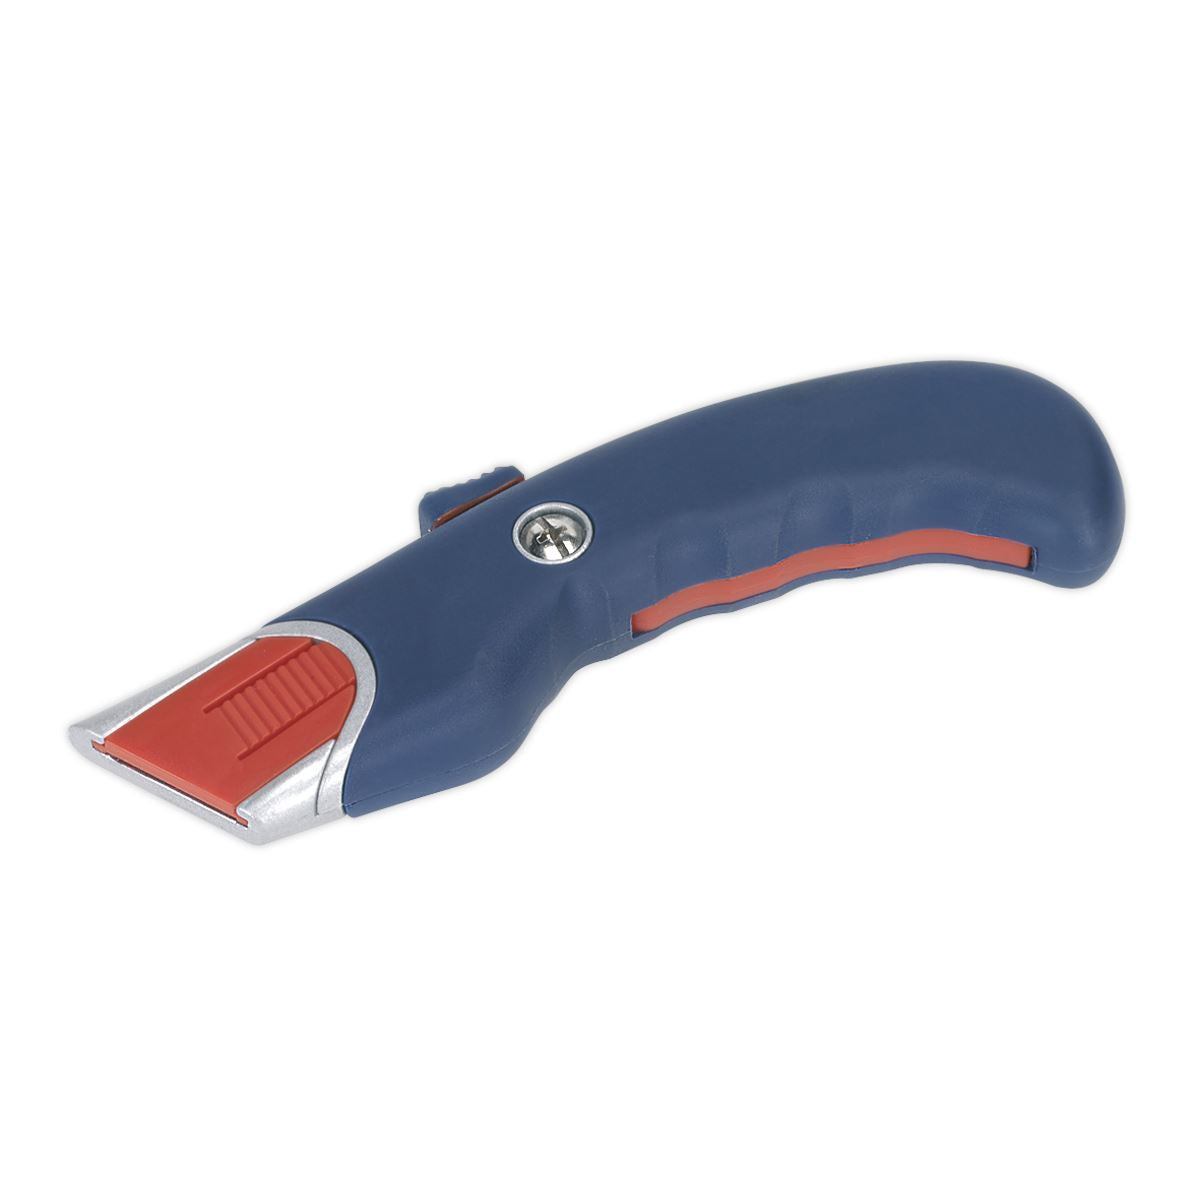 Sealey Premier Safety Knife Auto-Retracting